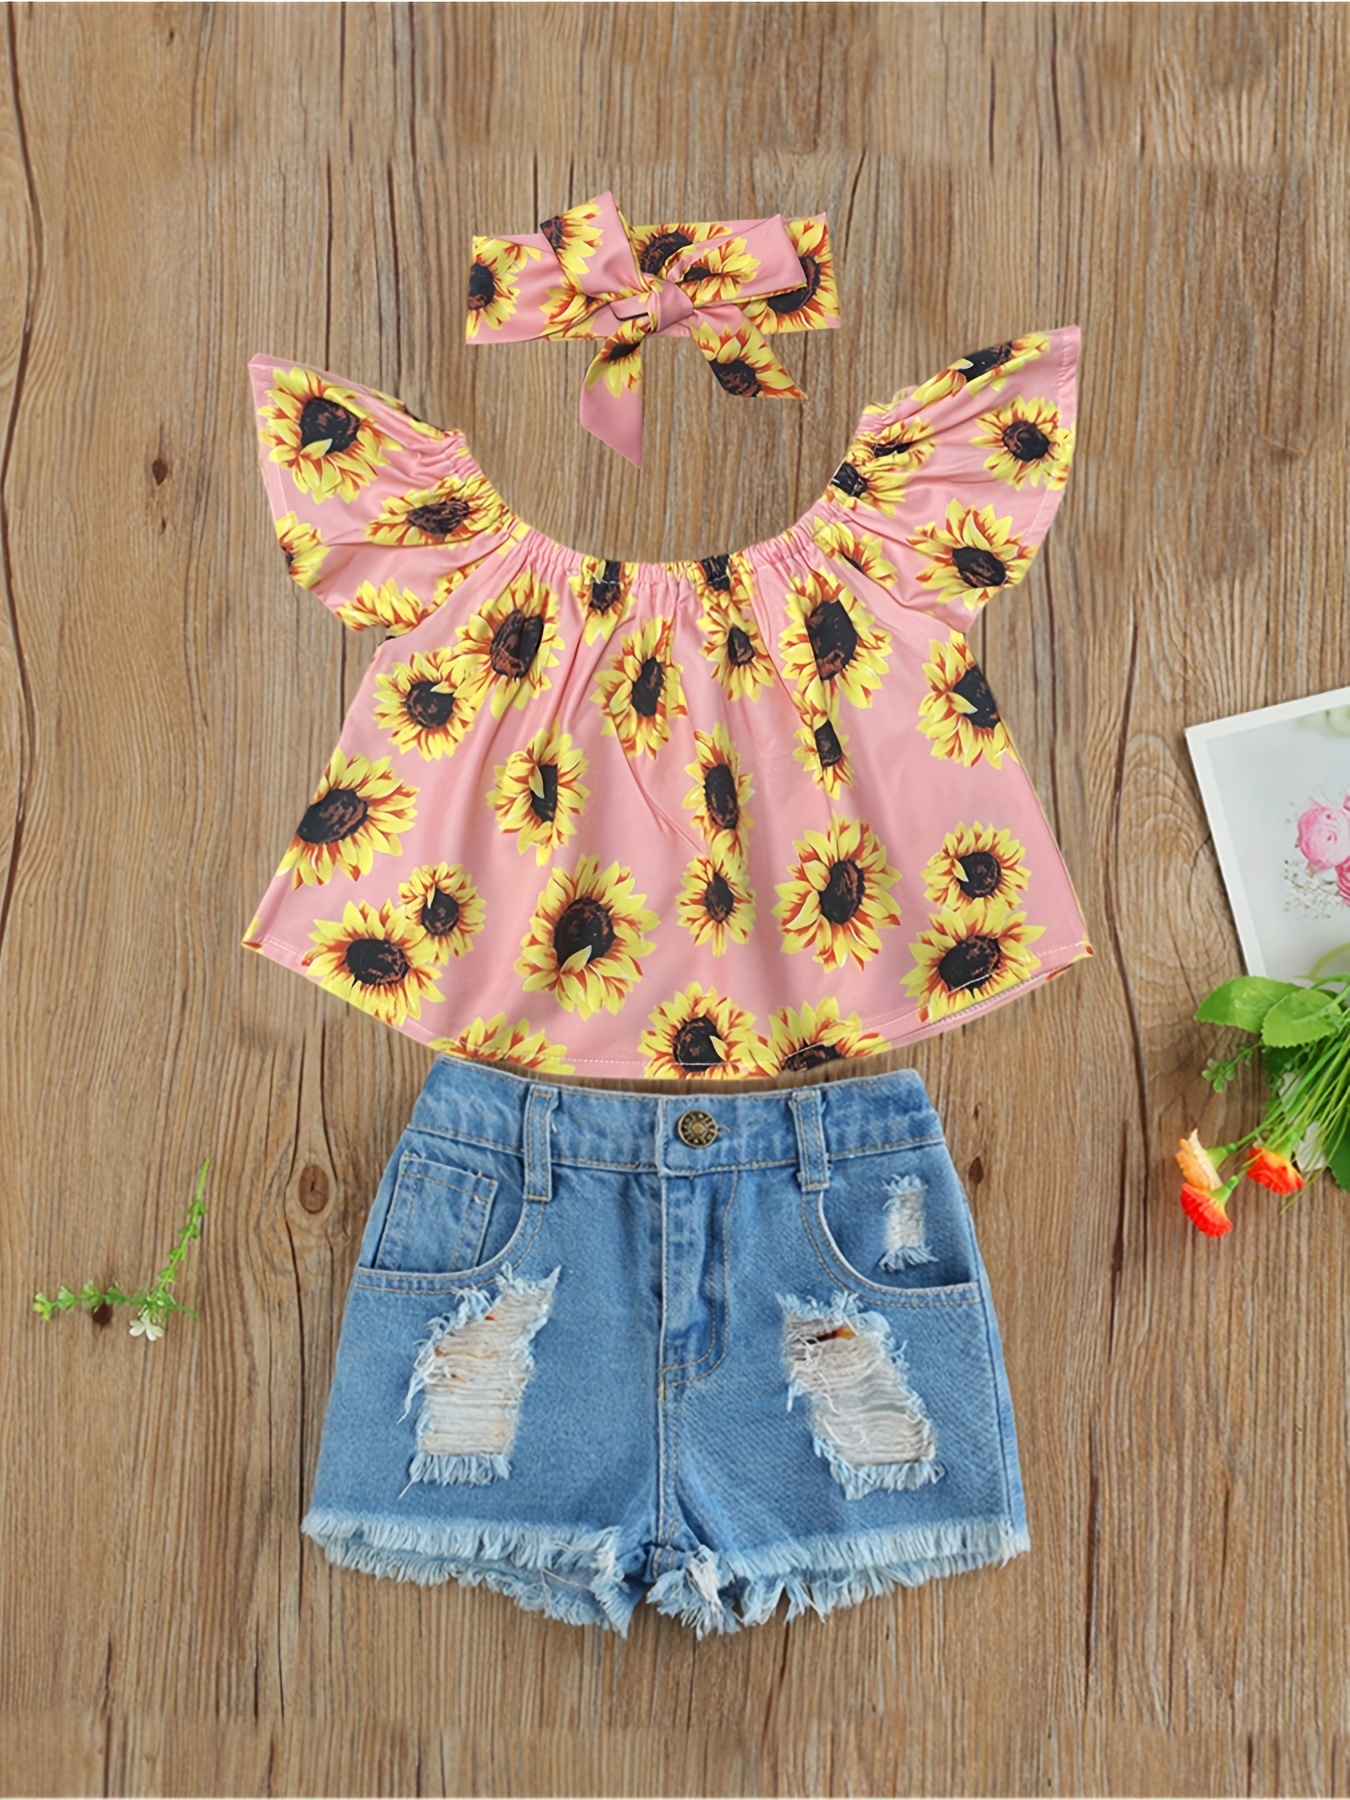 shorts short pants and tops small girls summer collection - Google Search